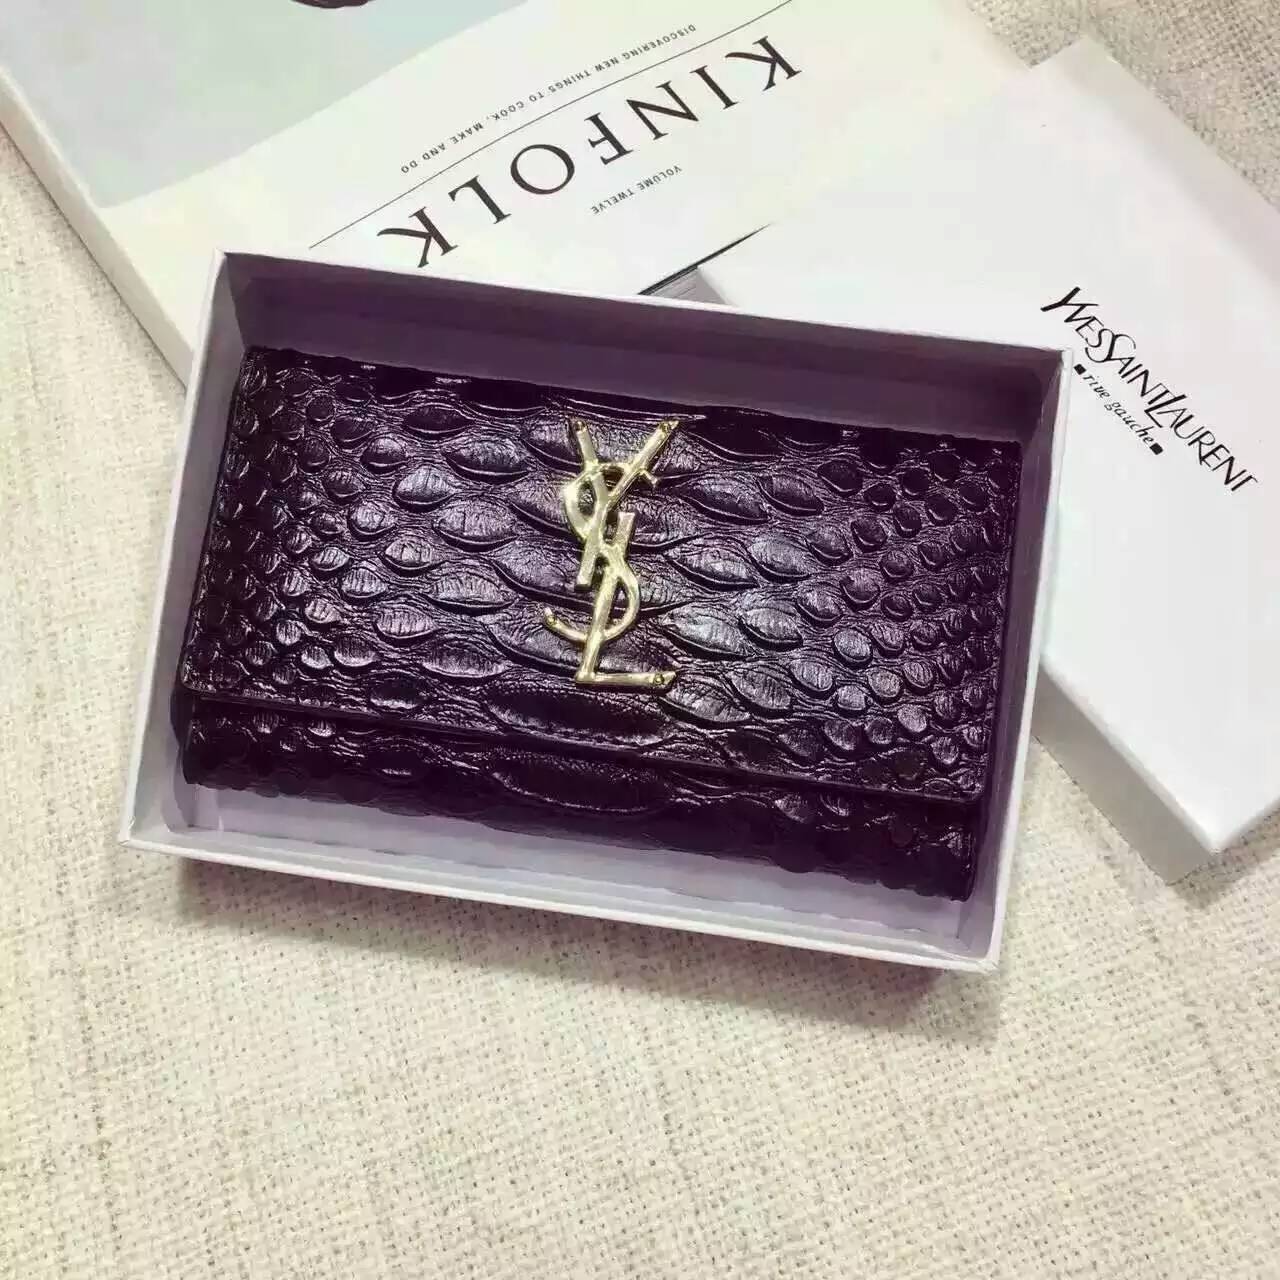 Limited Edition!2016 New Saint Laurent Small Leather Goods Cheap Sale-Saint Laurent Wallet in Black Python Embossed Leather